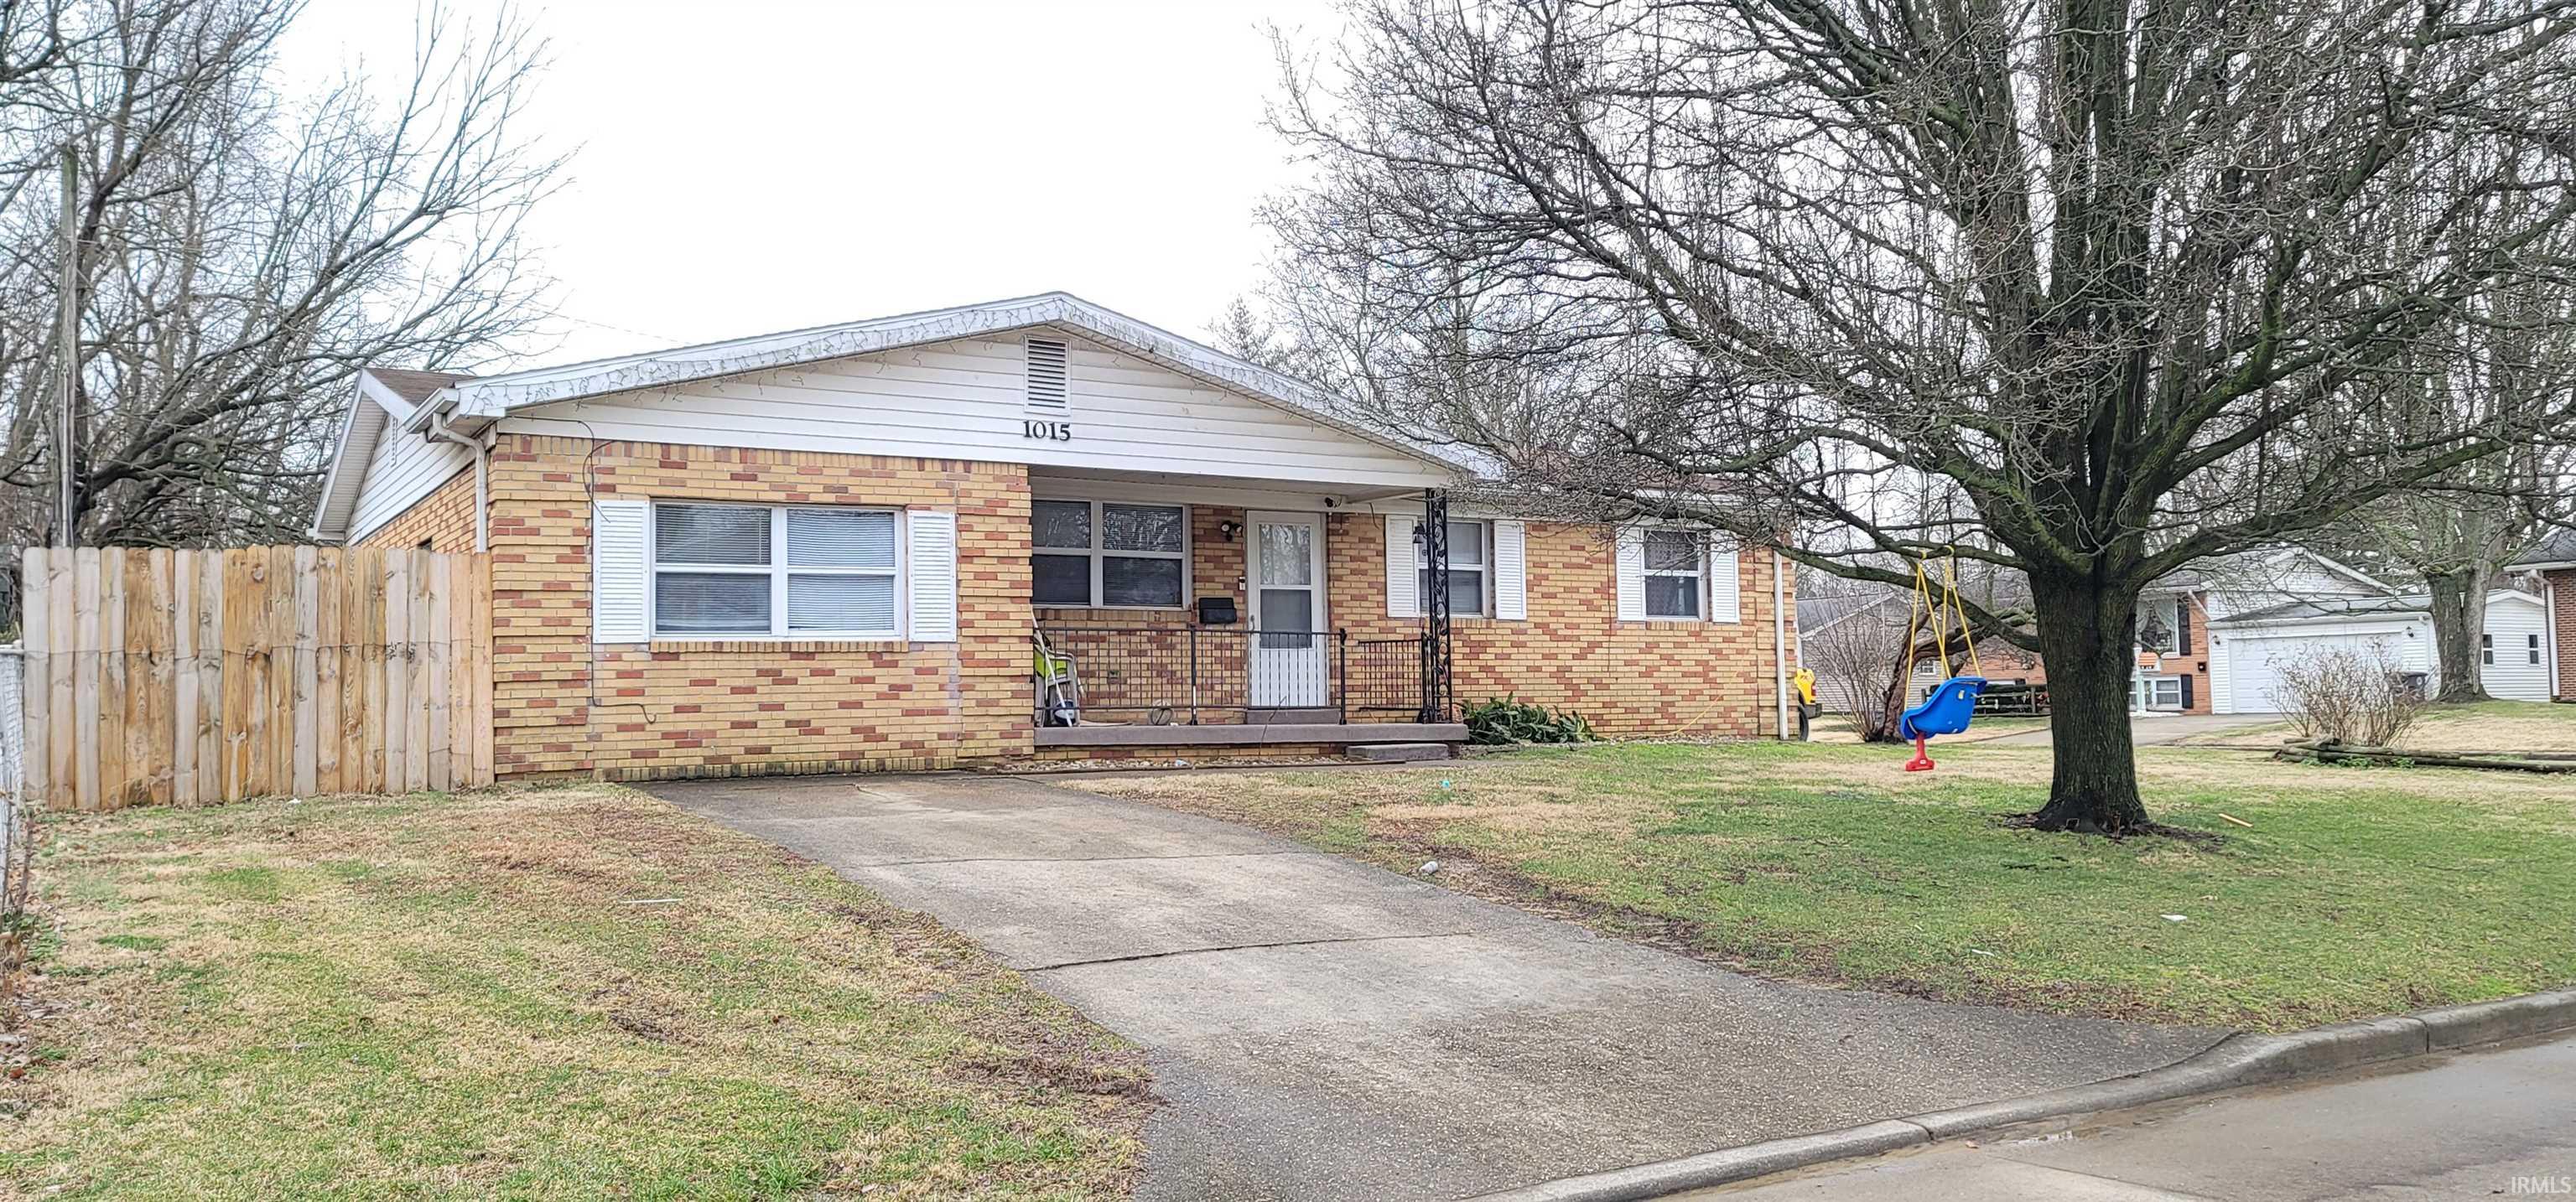 1015 NW Fairlawn Circle, Evansville, IN 47711